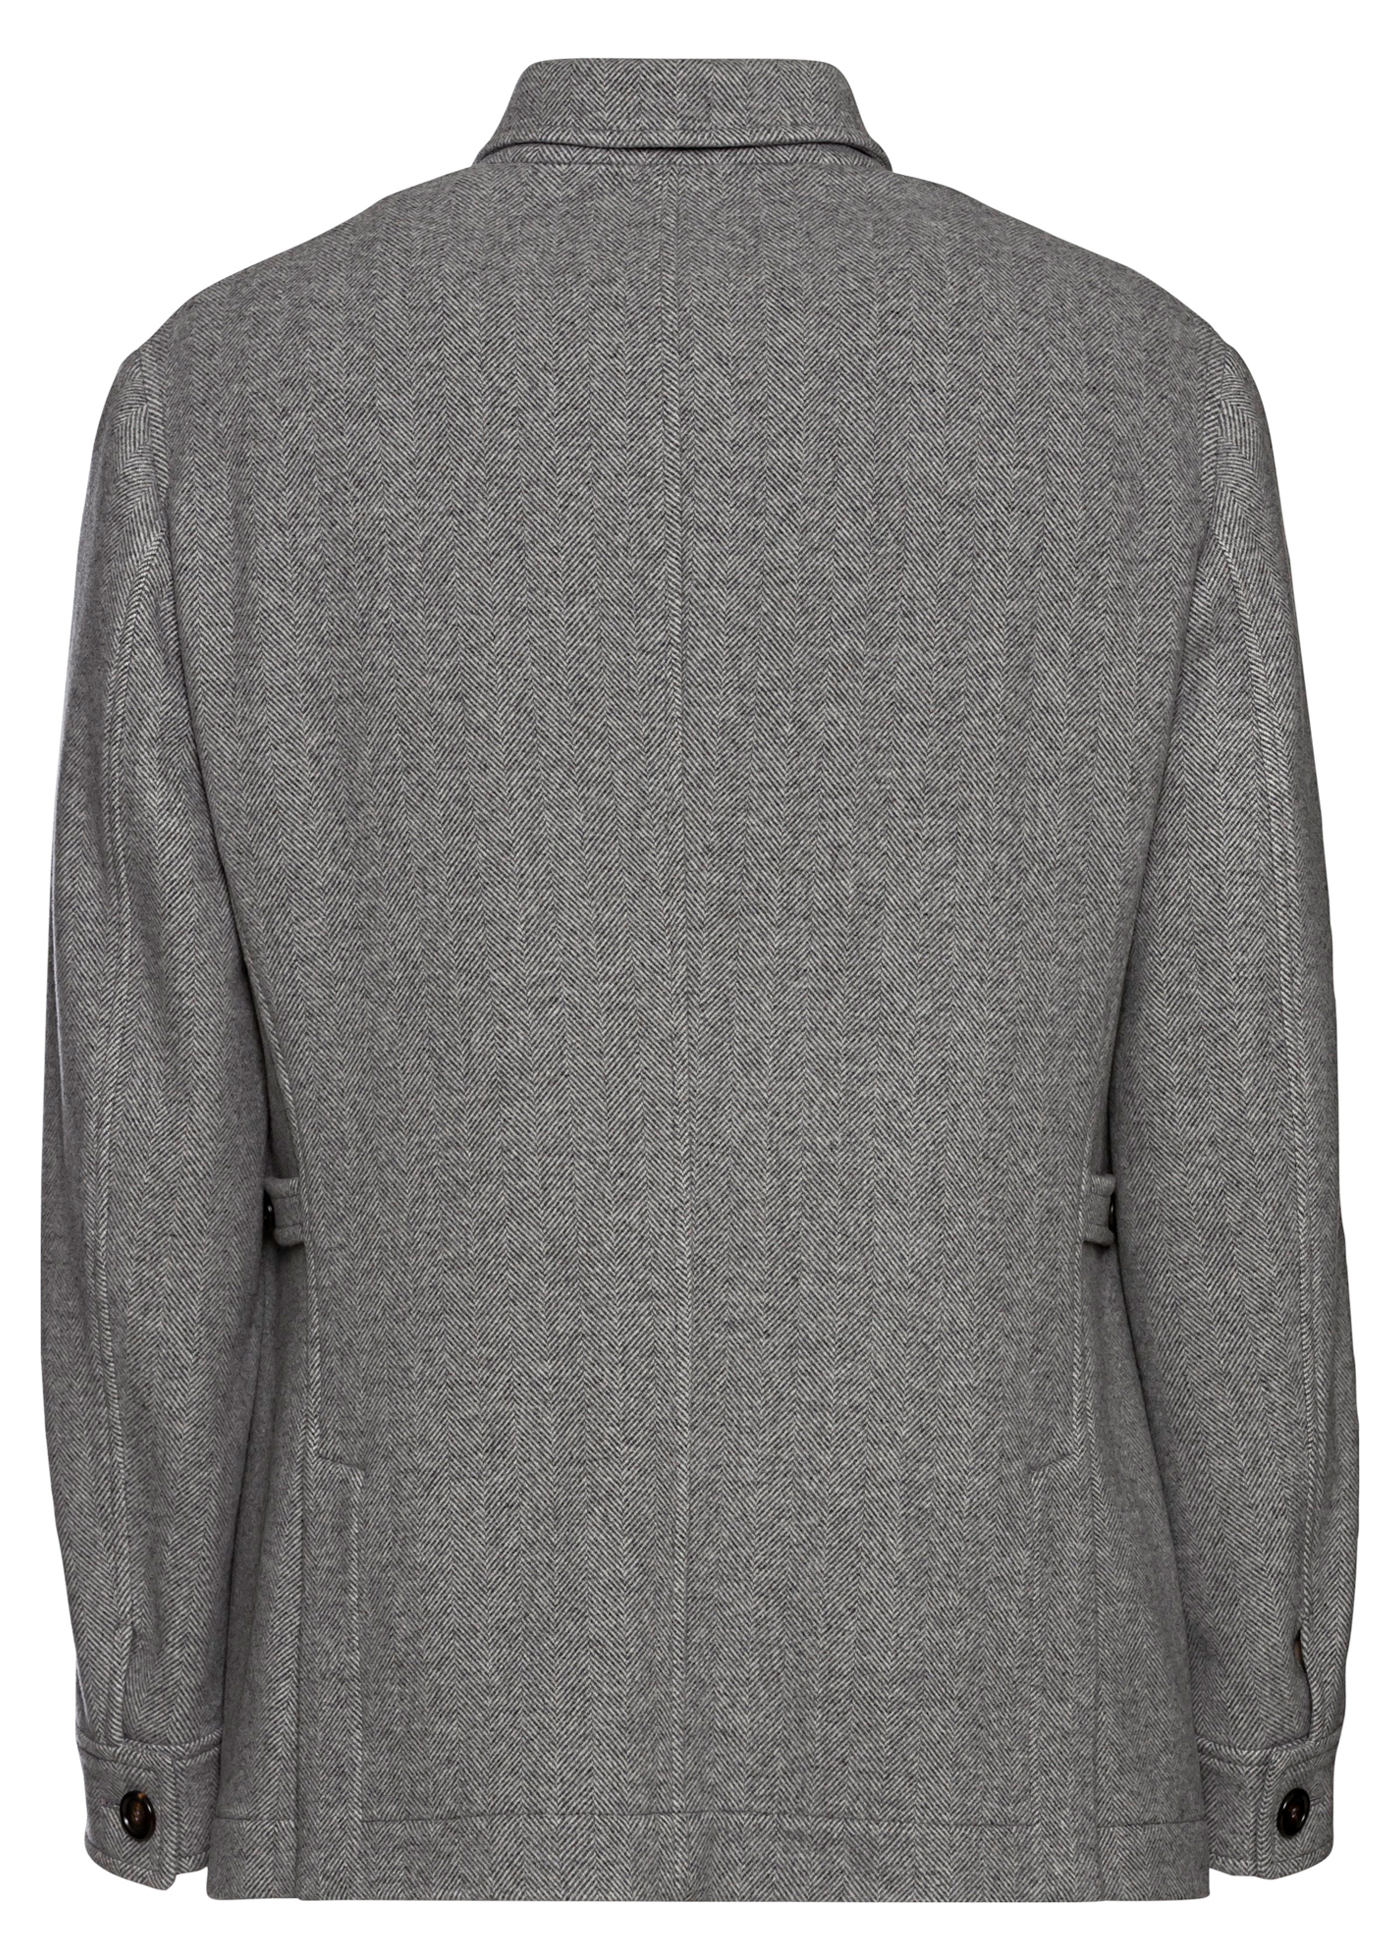 OUTERWEAR/ GRIGIO image number 1